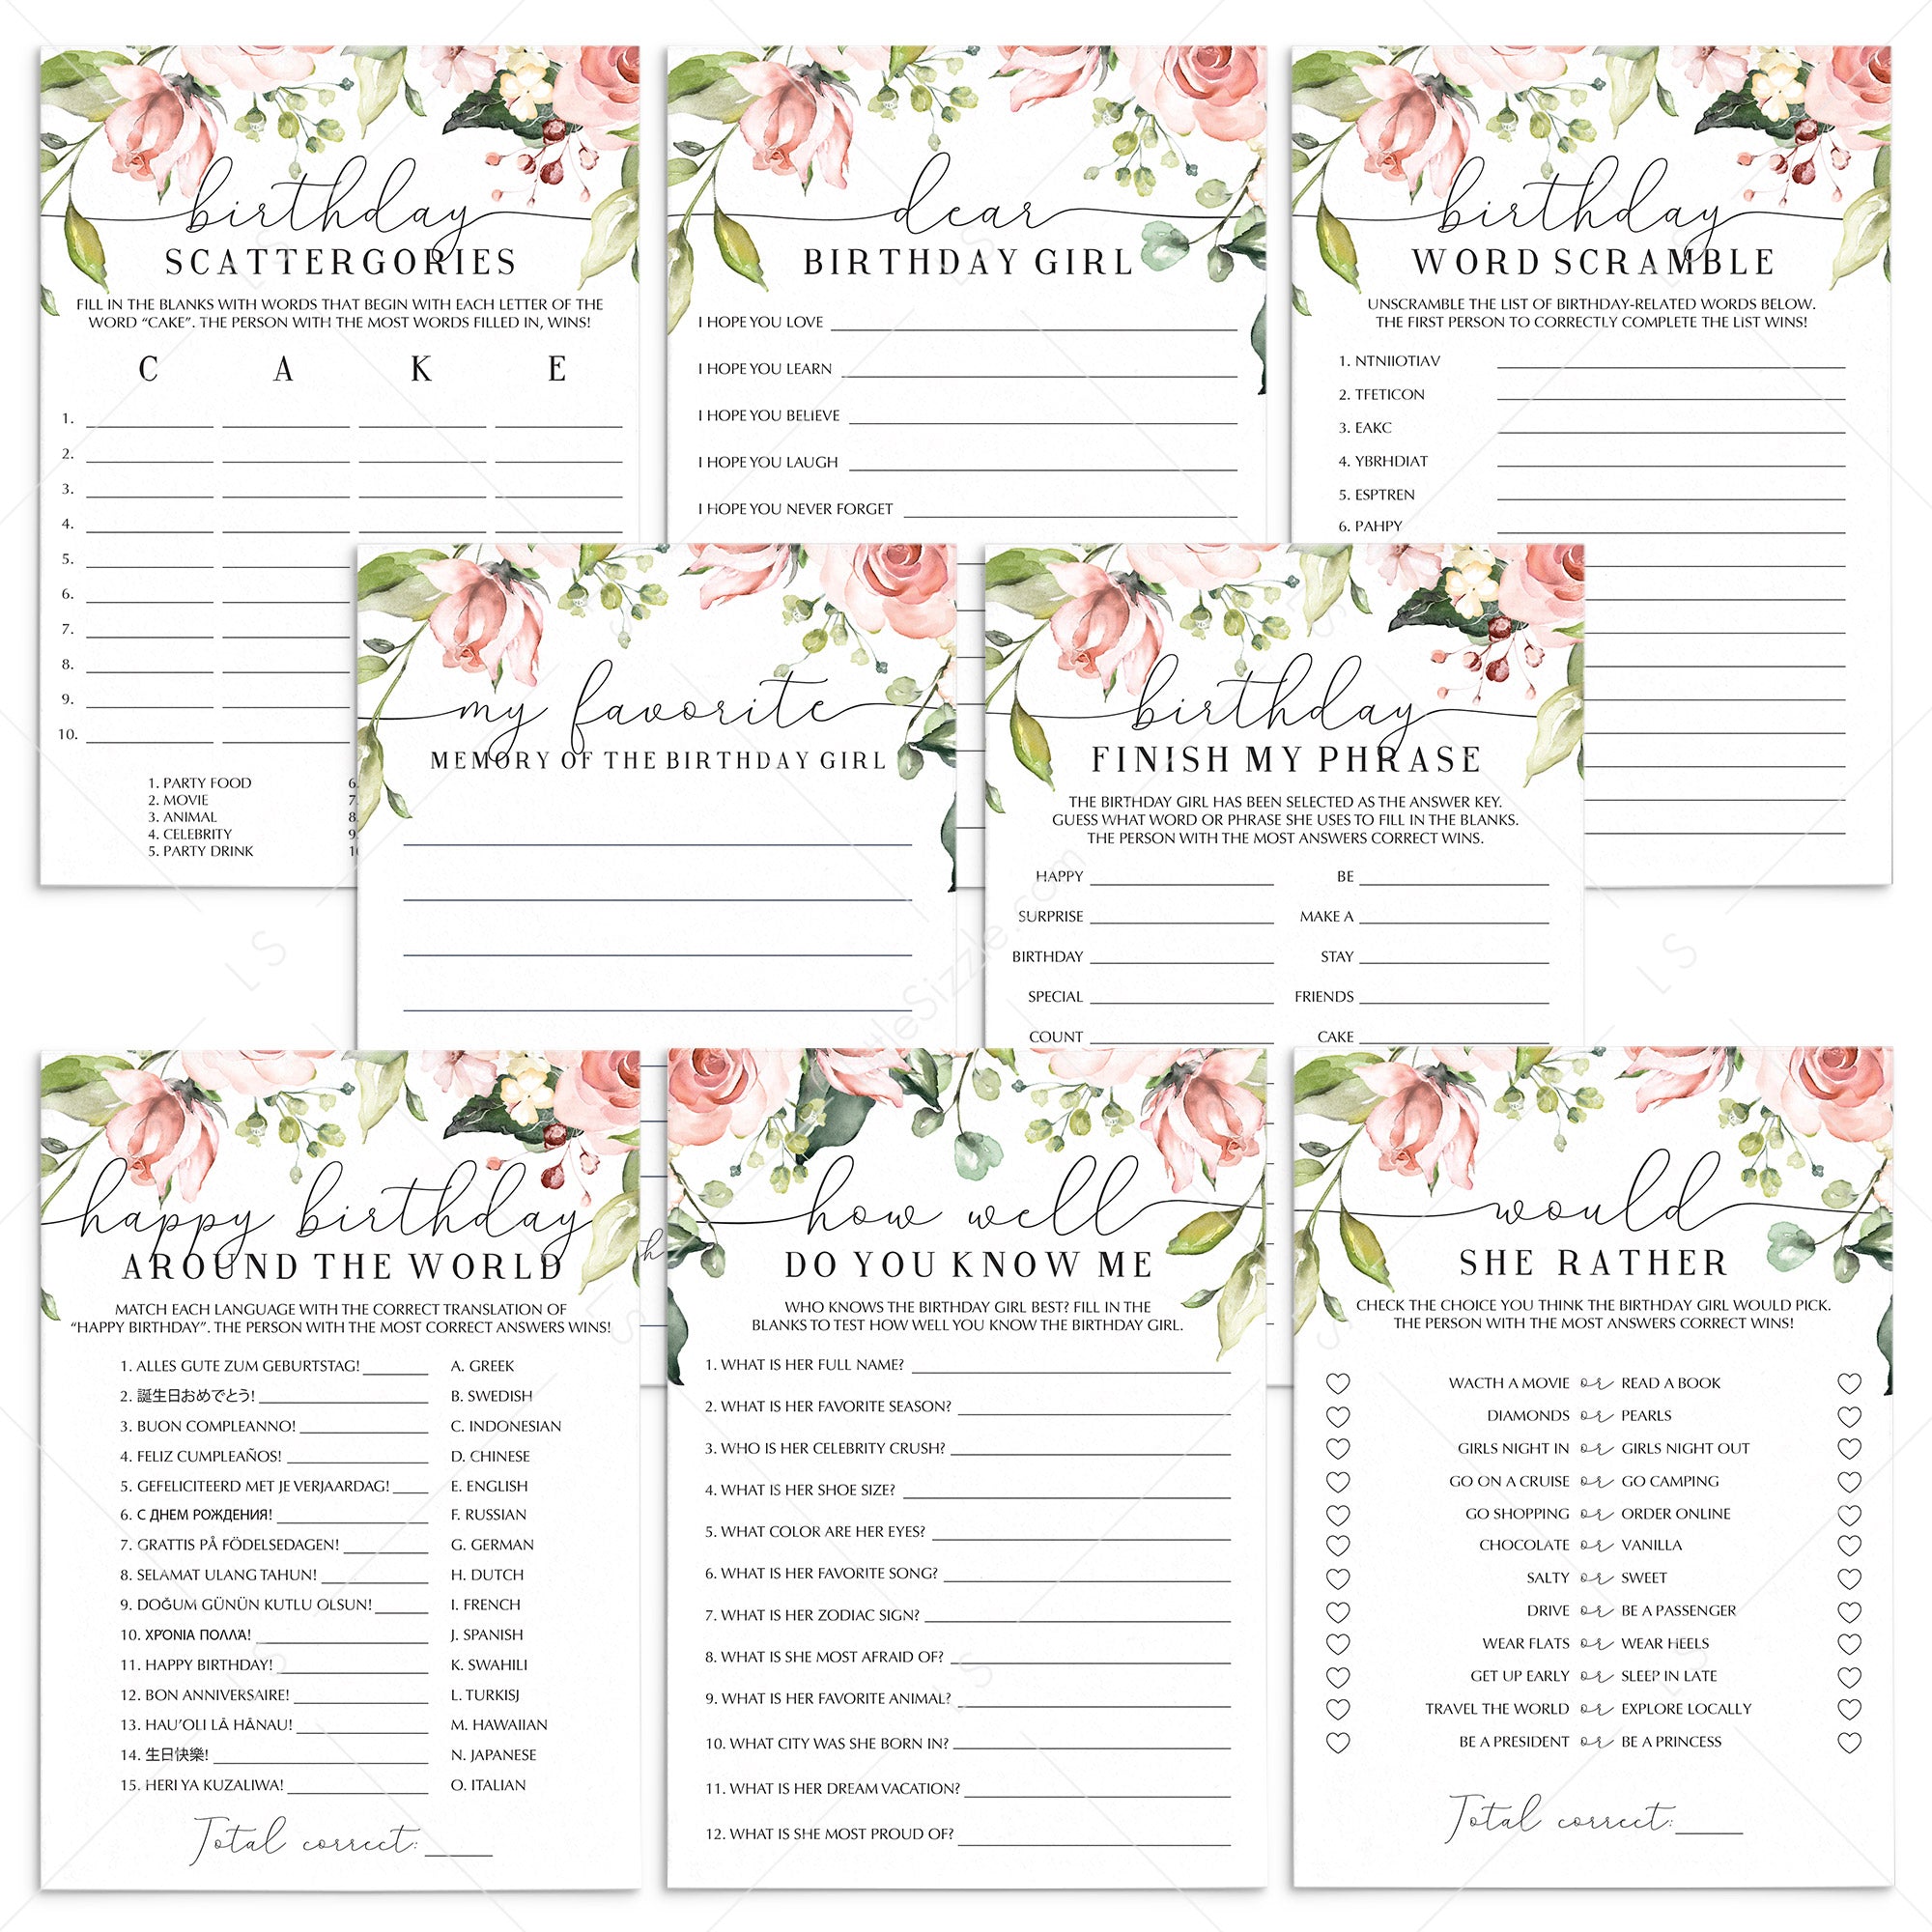 8 Blush Floral Birthday Party Games For Her Printable by LittleSizzle